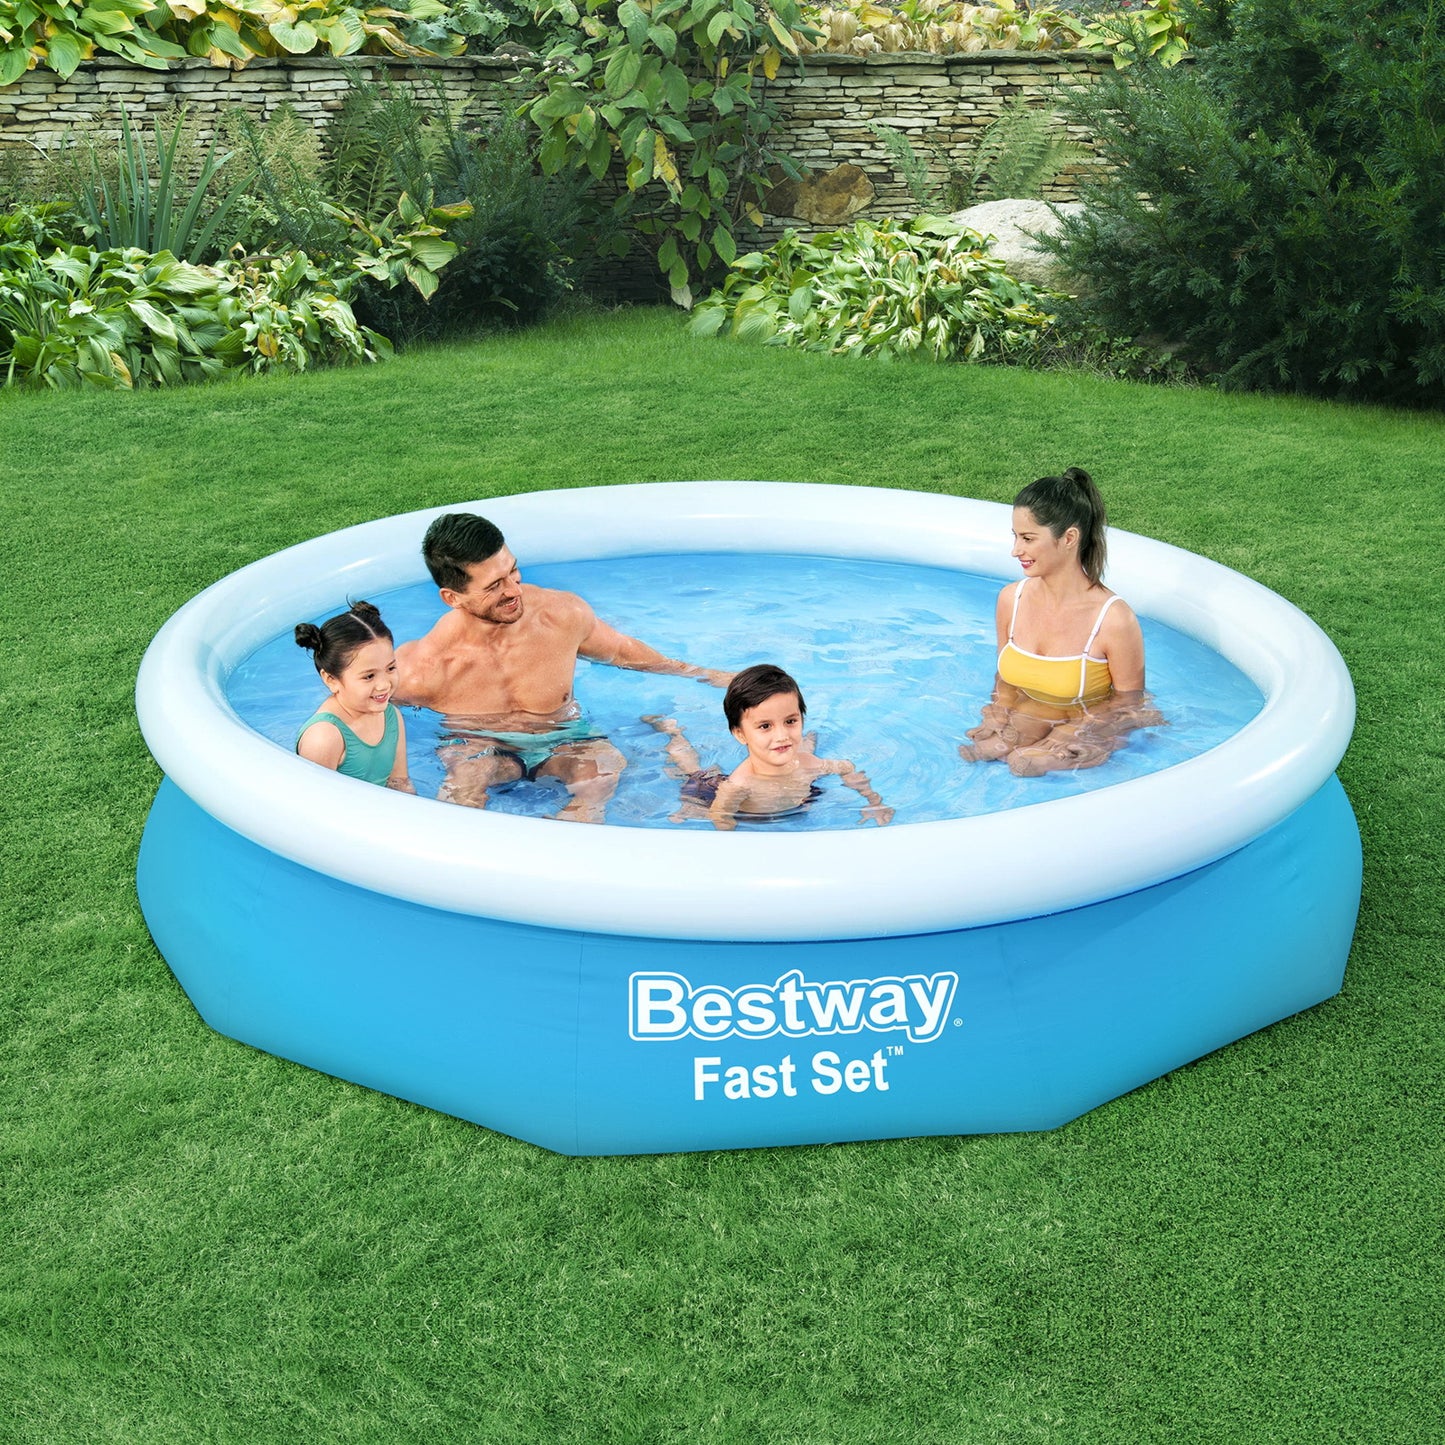 Mantle Sult modstand Bestway Swimming Pool Above Ground Kids Fast Set Pools with Filter Pum –  Home My Garden